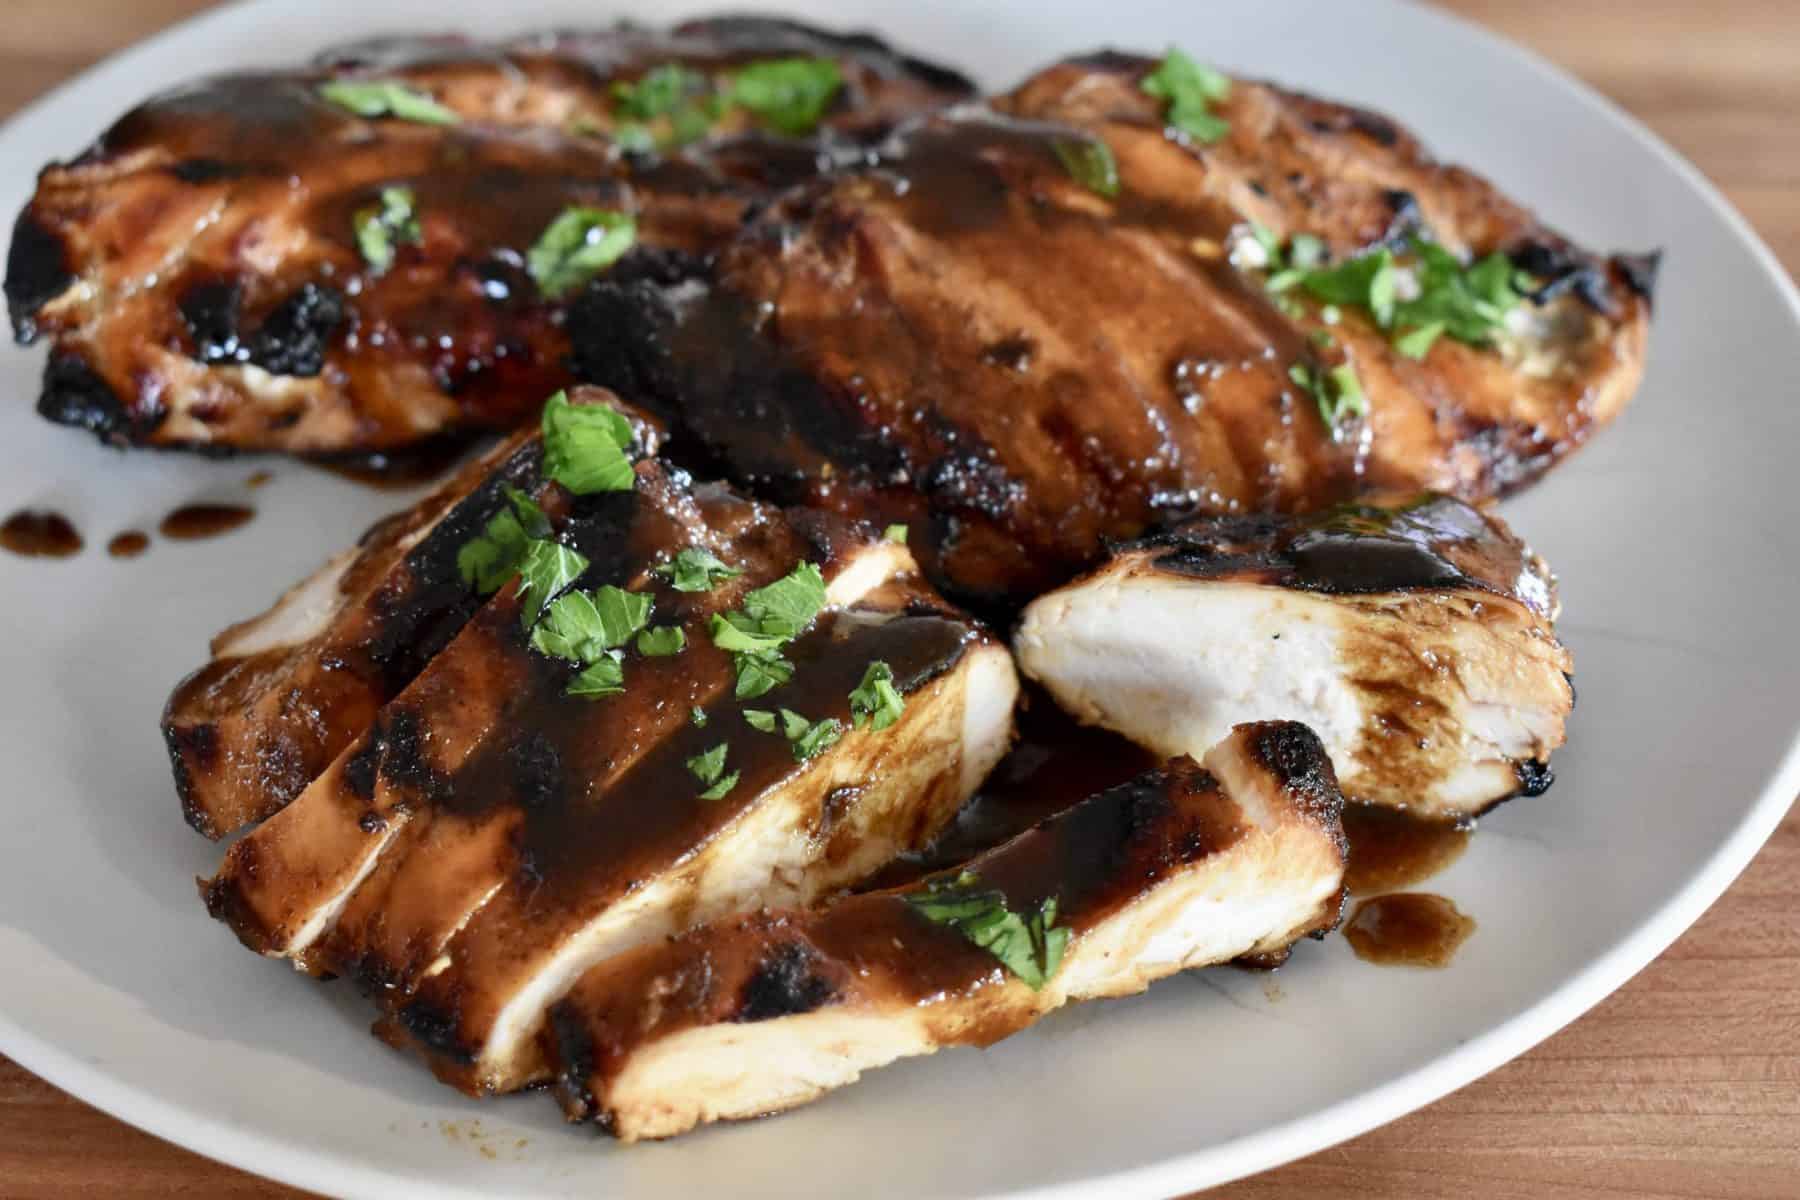 Marinated Chicken | Sweet Balsamic Sauce - This Delicious House